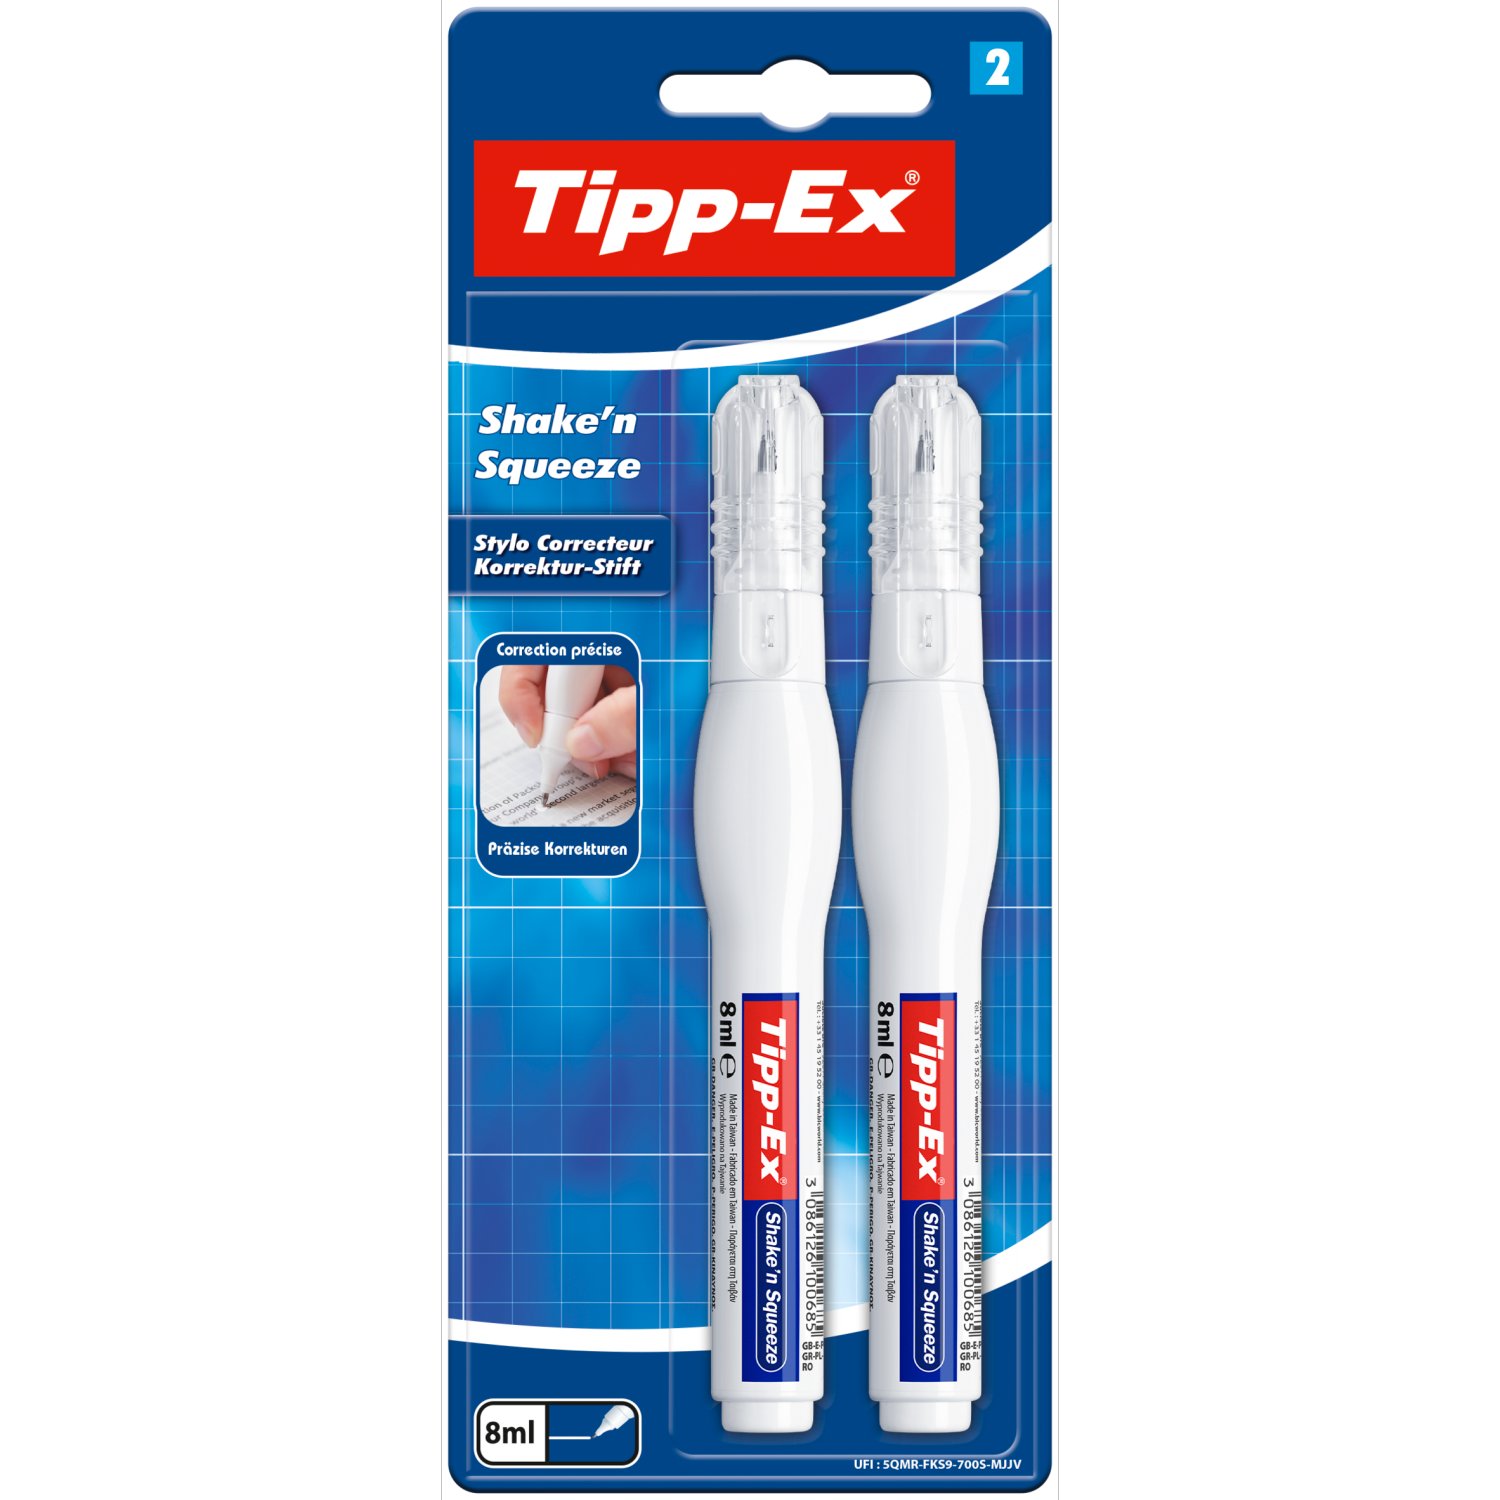 Tippex Shake N Squeeze 2pk (1 Piece)